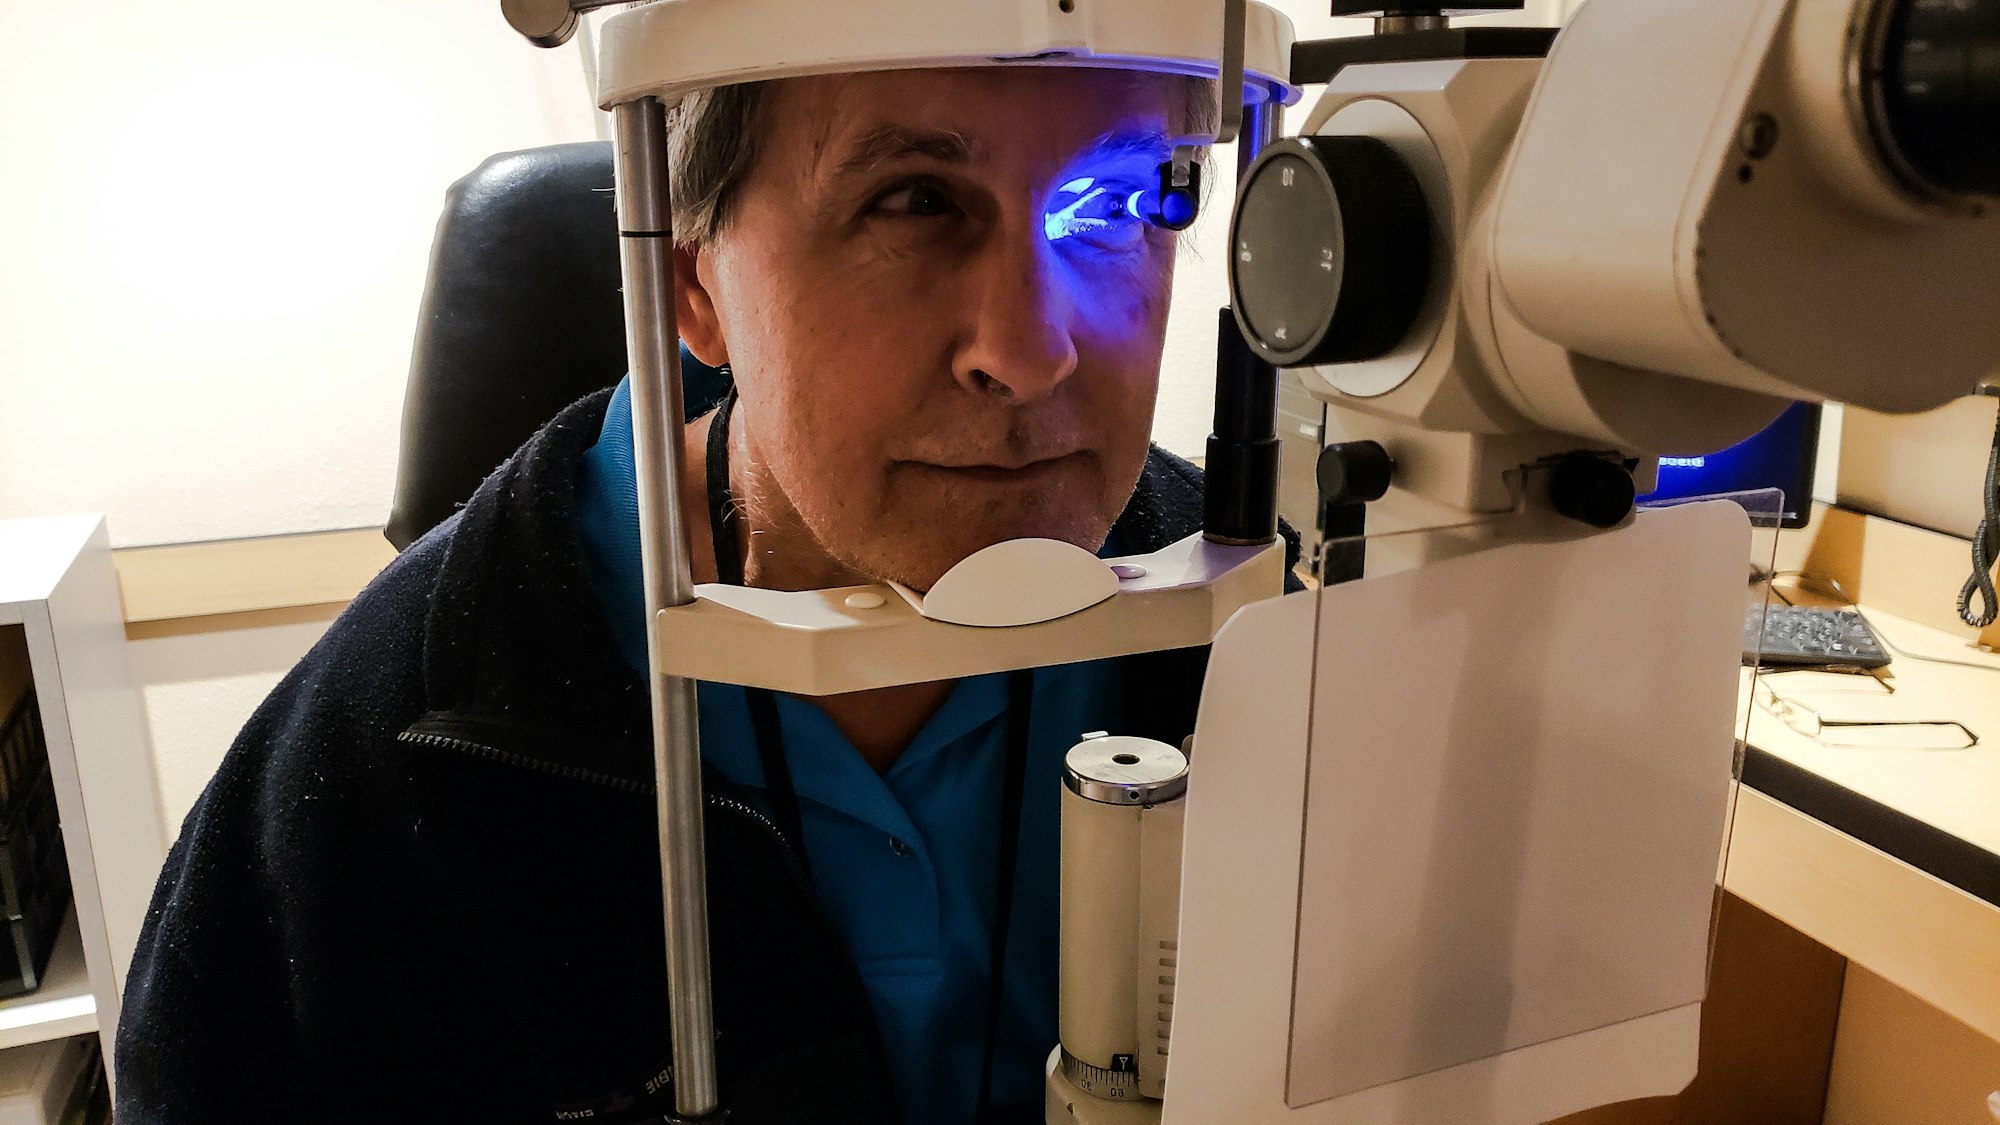 Spotlight on yearly eye exam for babyboomer by ophthalmologist to check for glaucoma with neon light